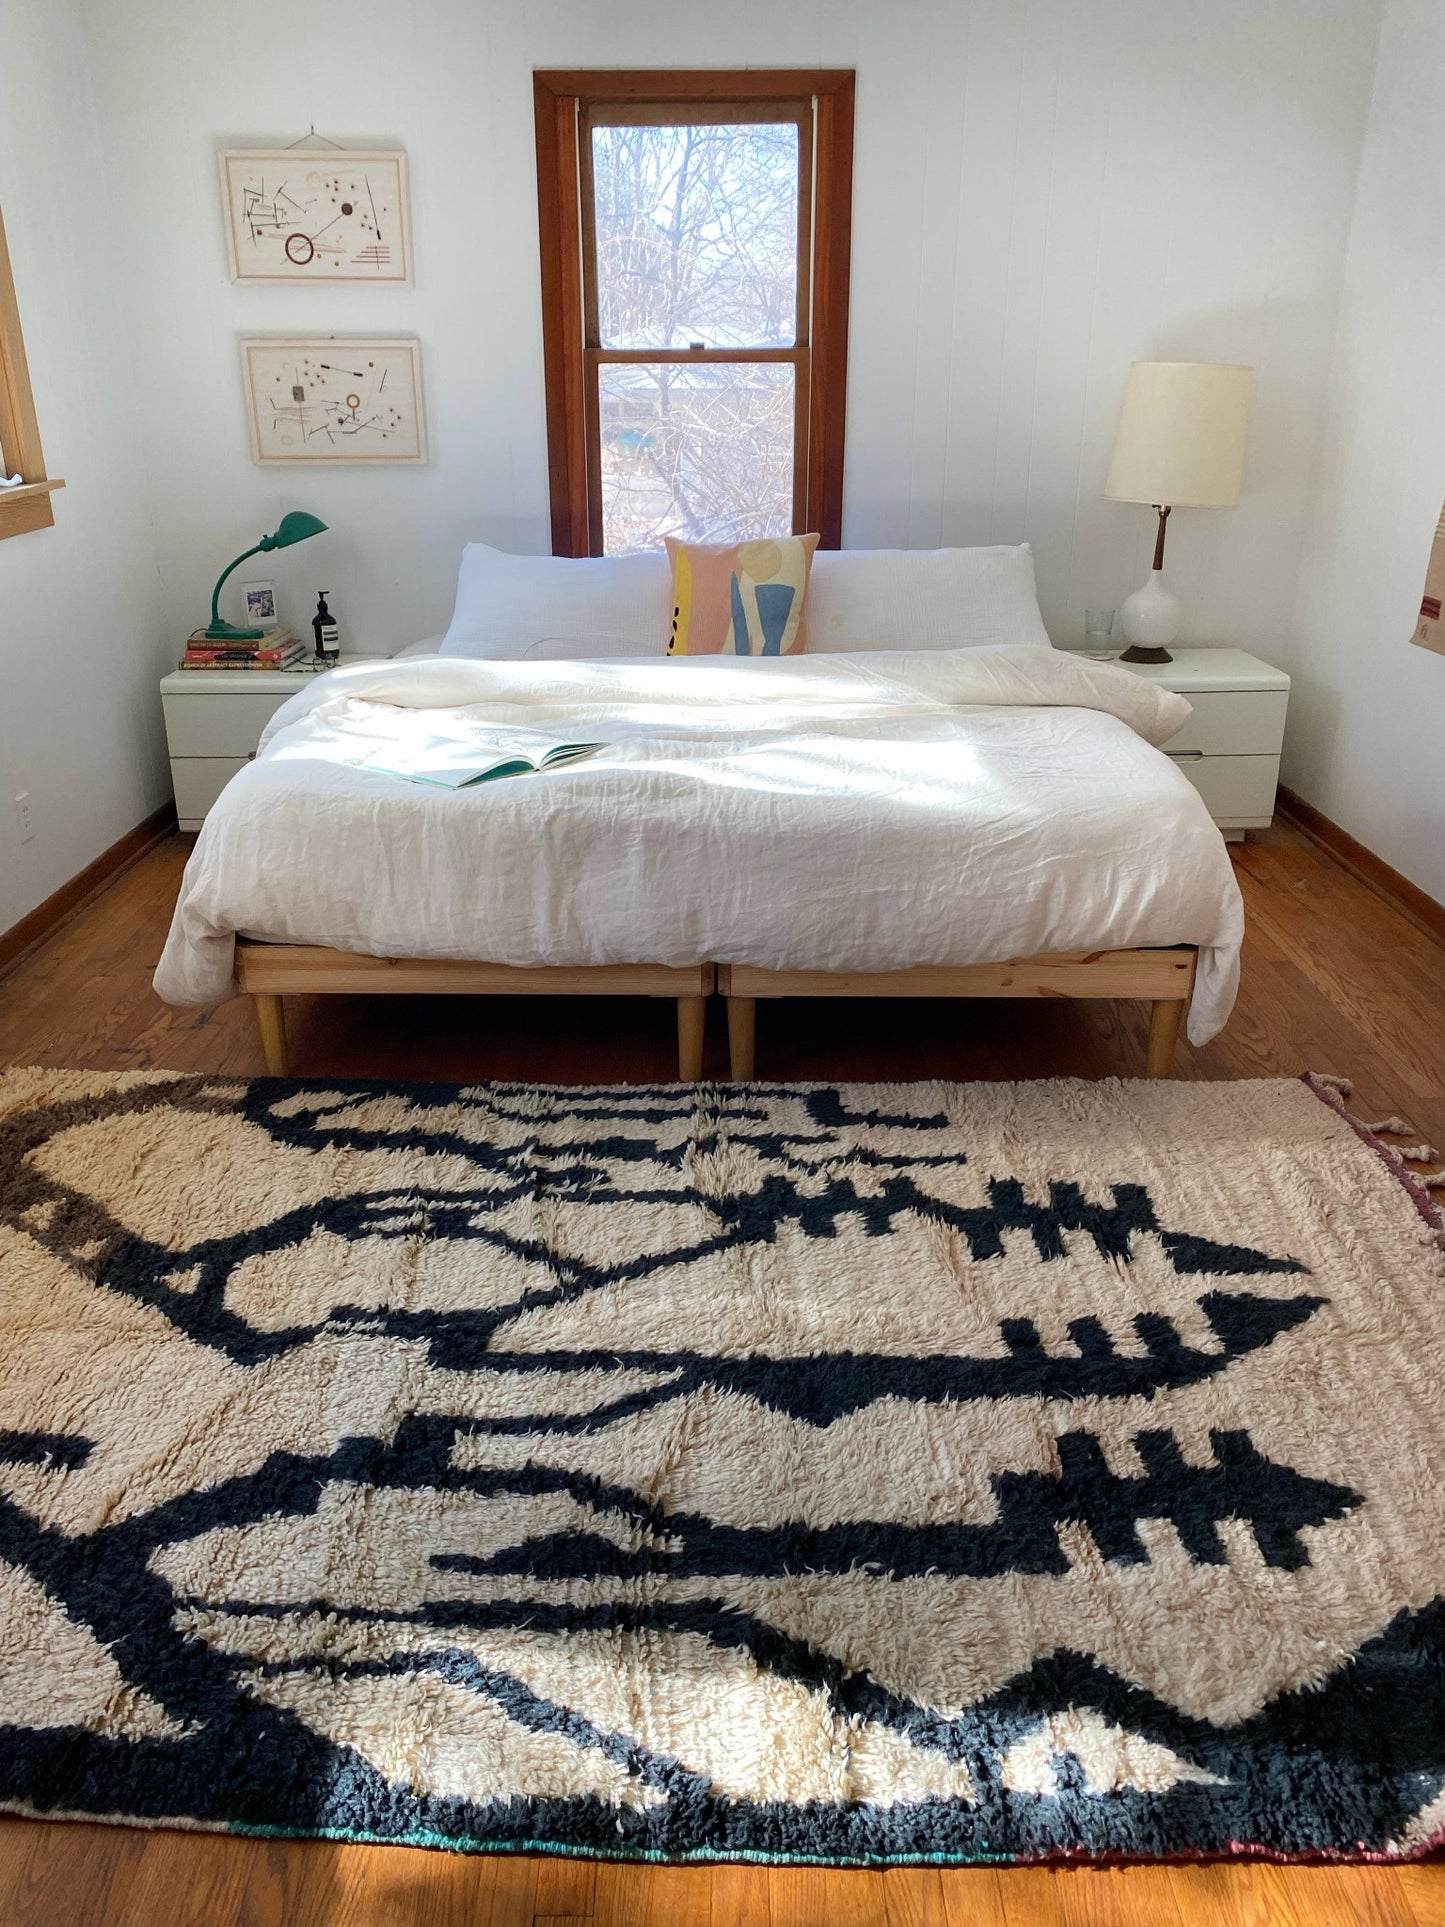 Style Alfama Rug with a King Size Bed